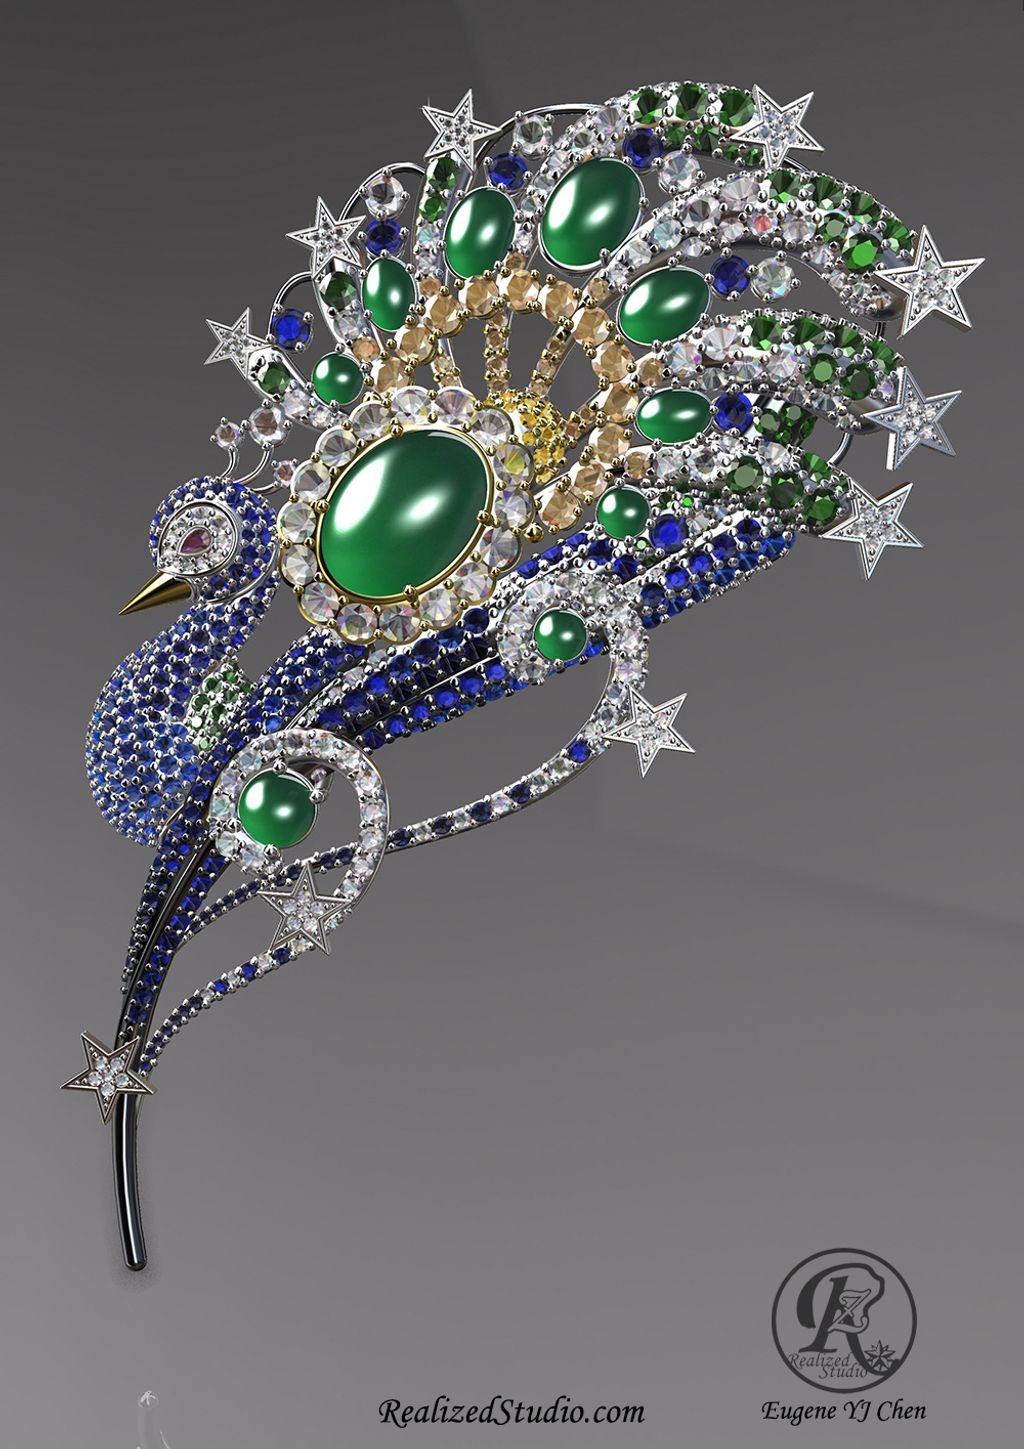 Peacock Brooch of Stary Gala ext ekrzs